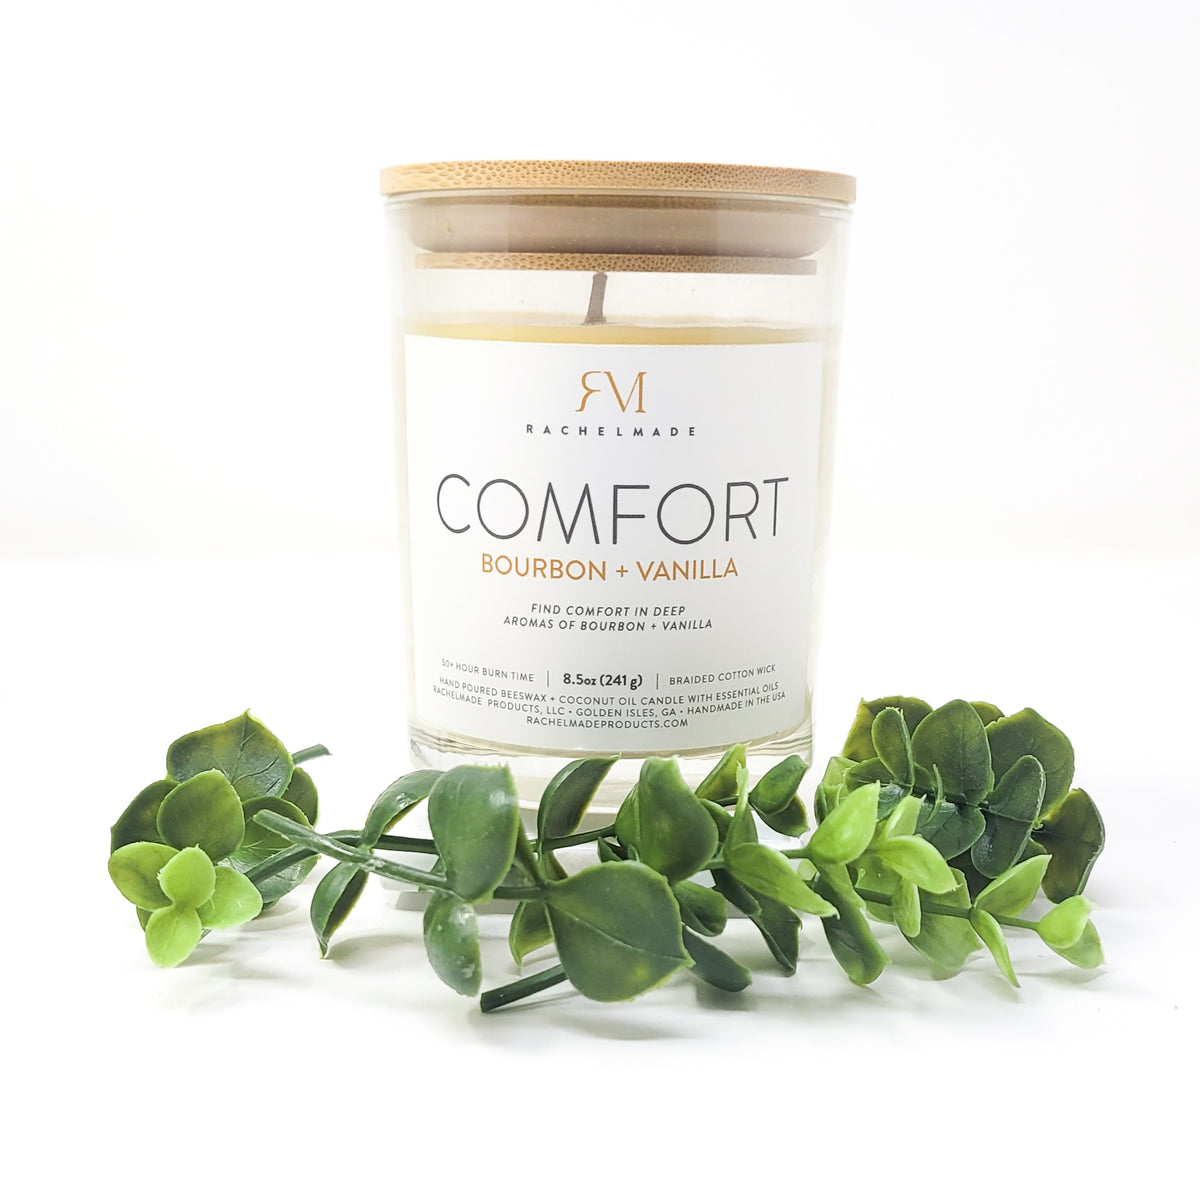 COMFORT candle